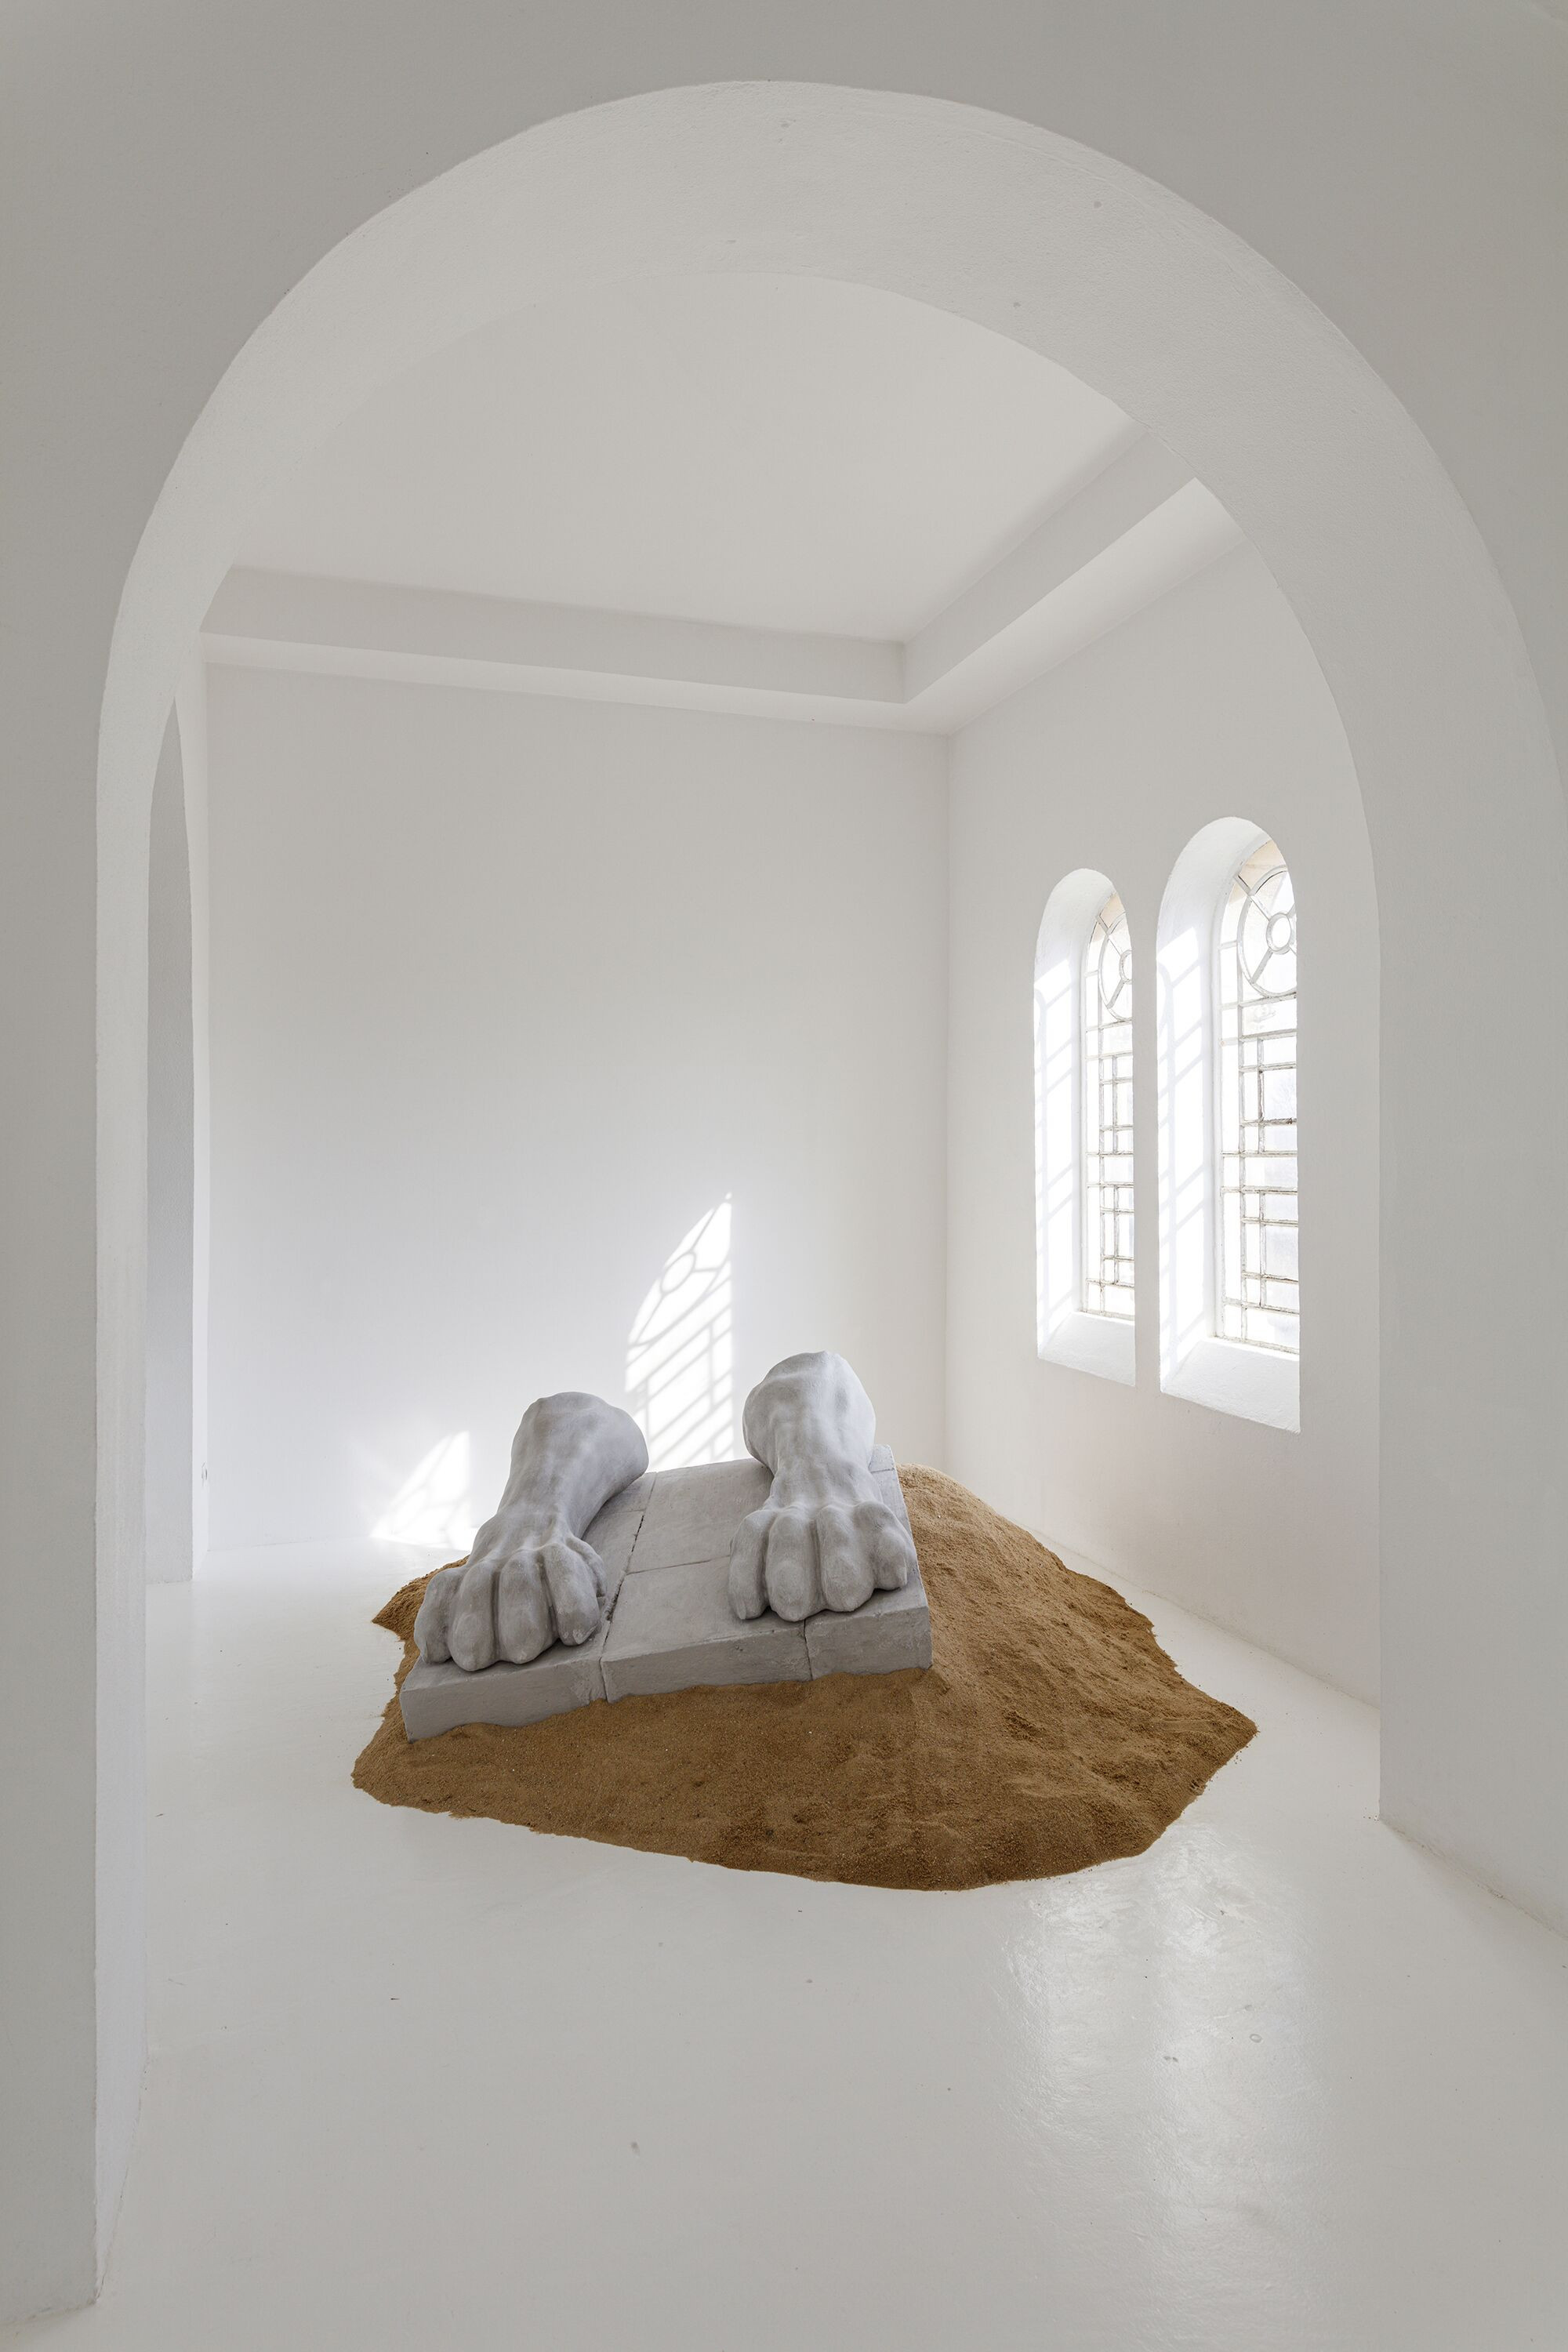 Zuzanna Czebatul, Their New Power (Paws), 2020. Polystyrene, acrylic and sand, 140×140 x 50 cm. From the exhibition &#39;The Singing Dunes’, CAC-La synagogue de Delme